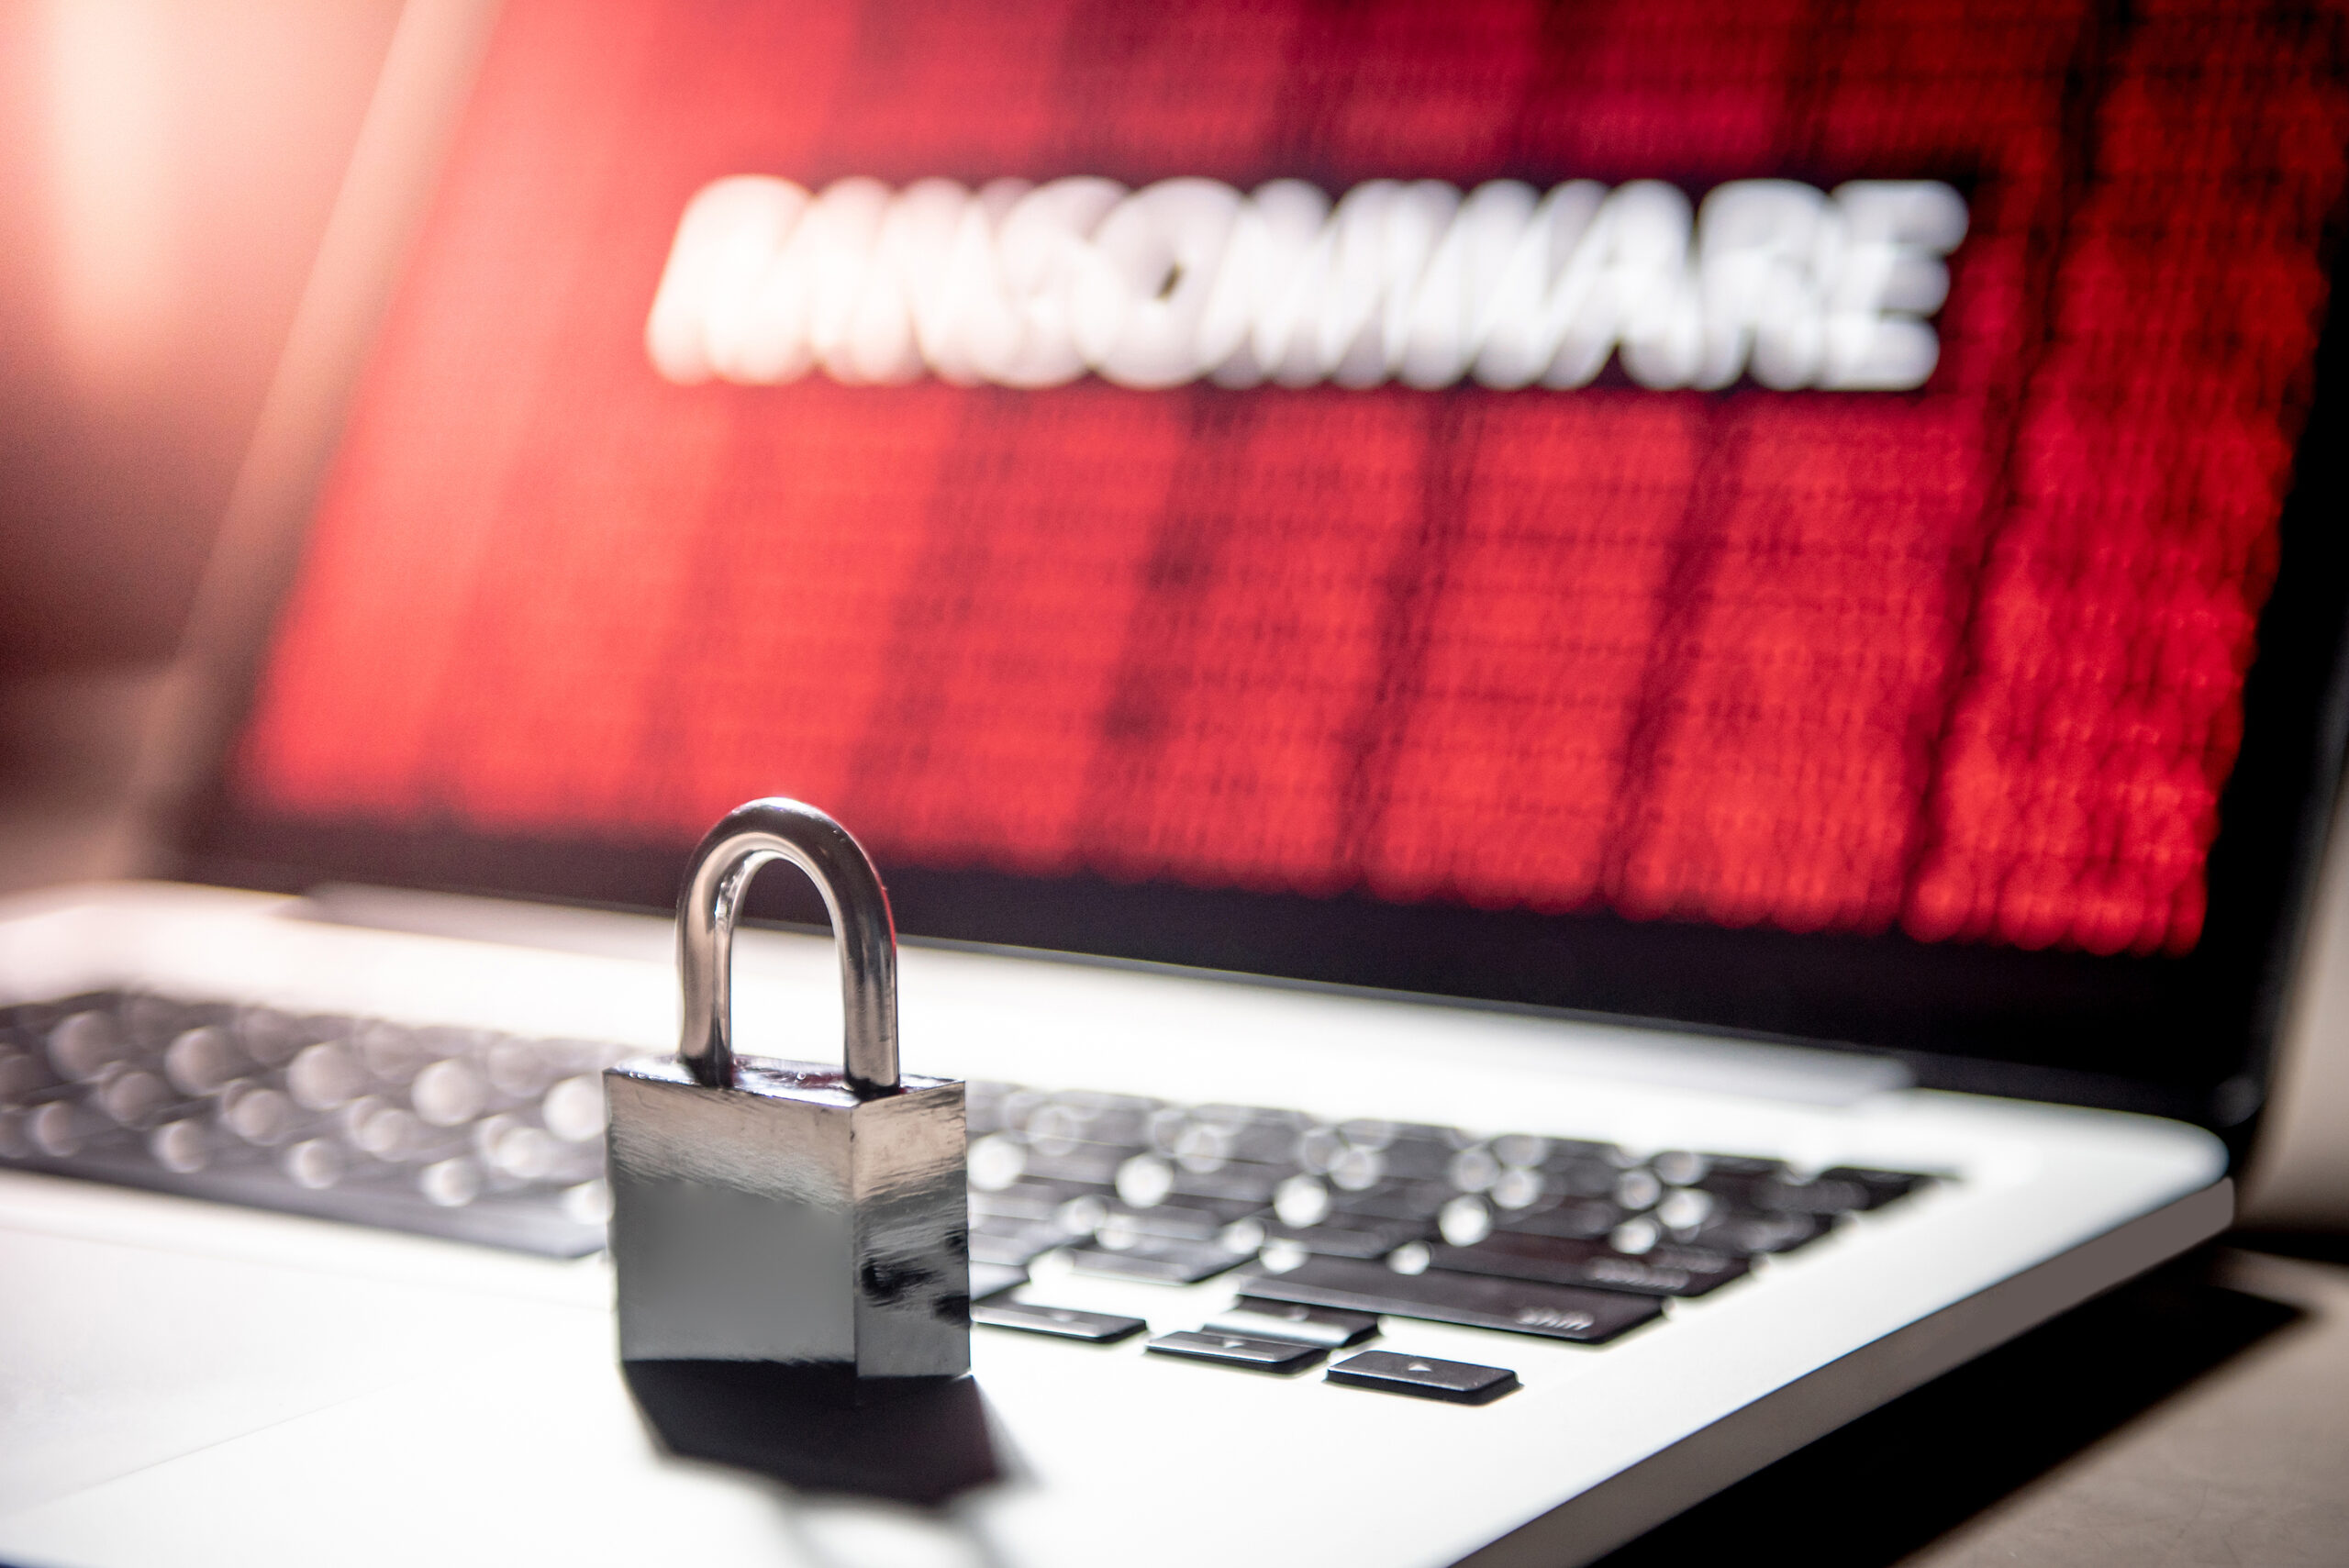 Take These Steps Immediately If You've Been Hit with Ransomware